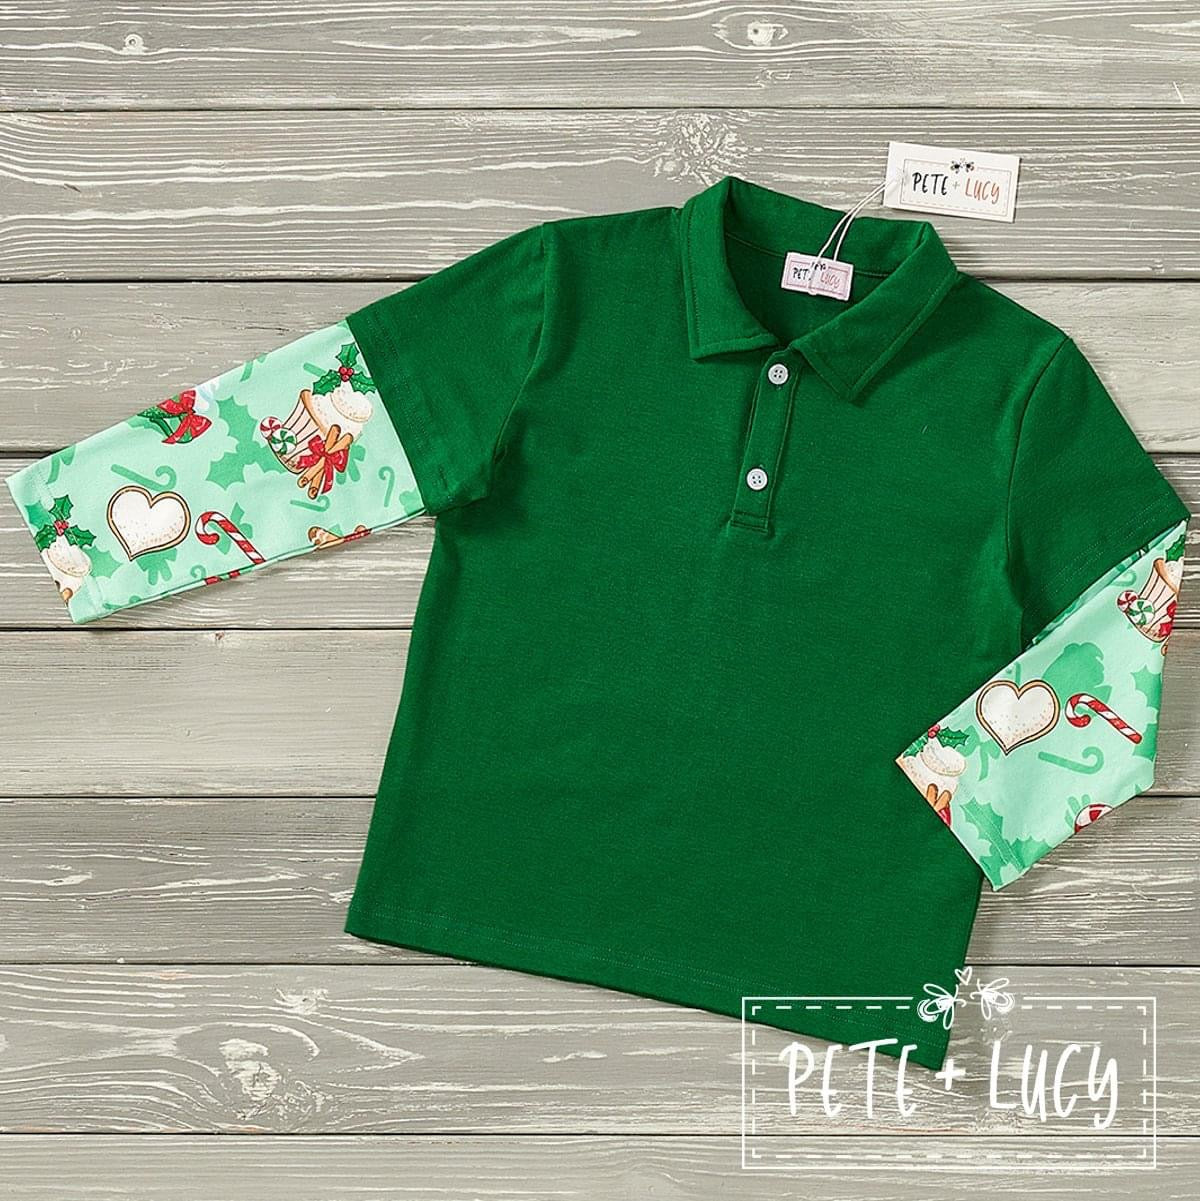 Pete + Lucy Christmas Sweets Boys Collared Top